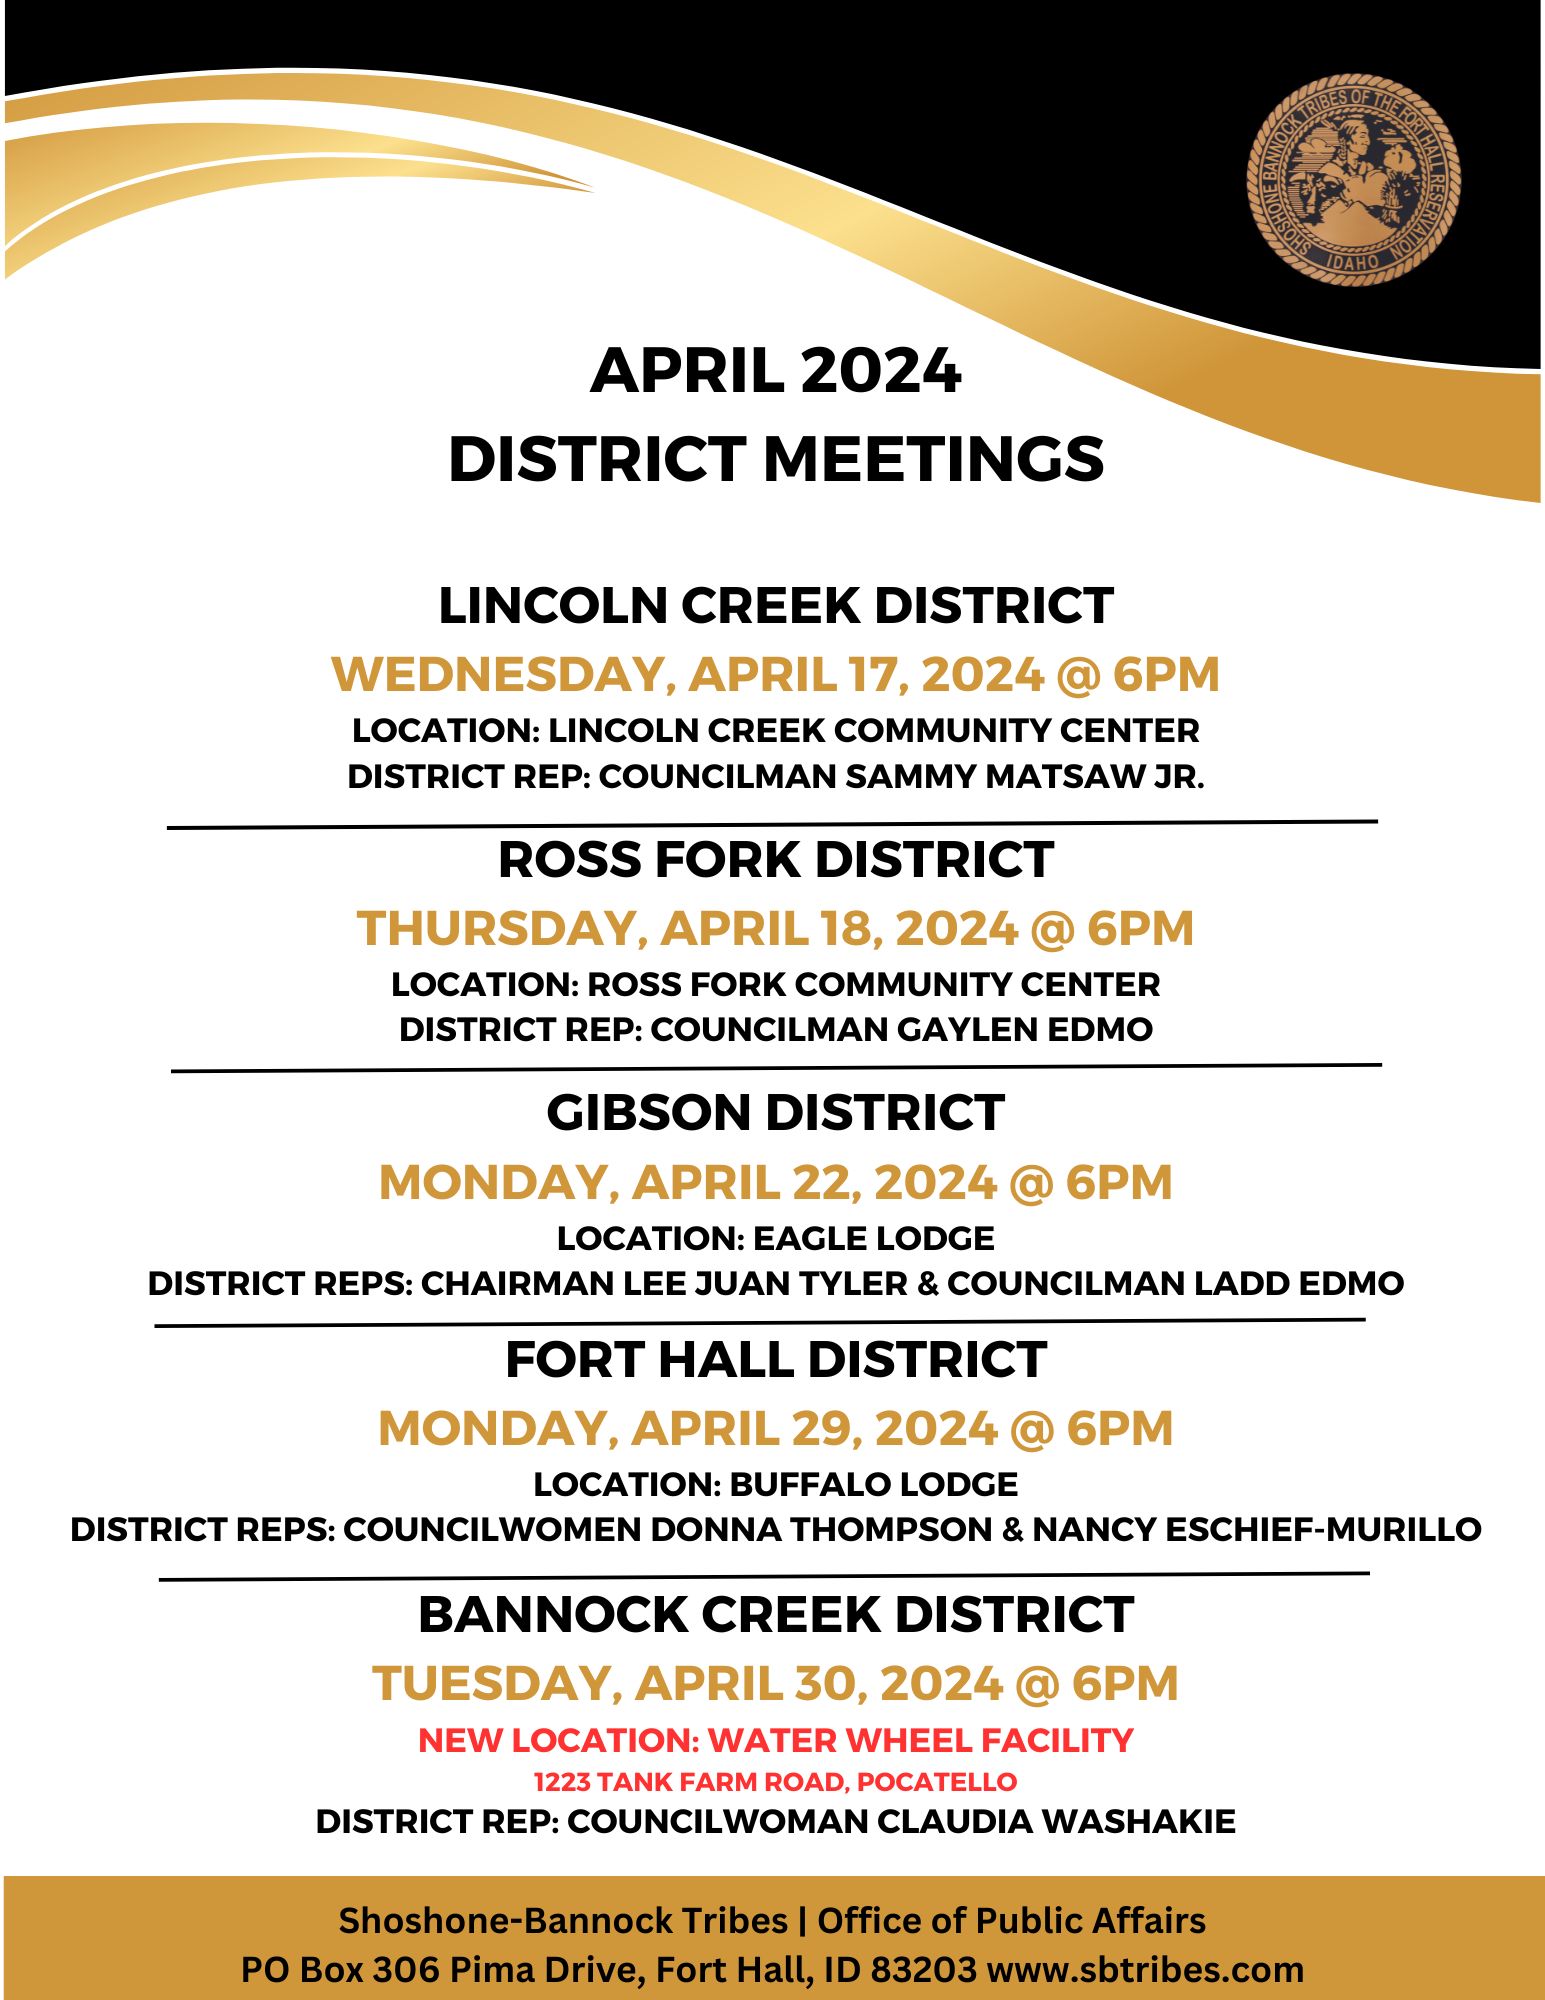 Featured image for “Buffalo Lodge District Meeting – April 29th”